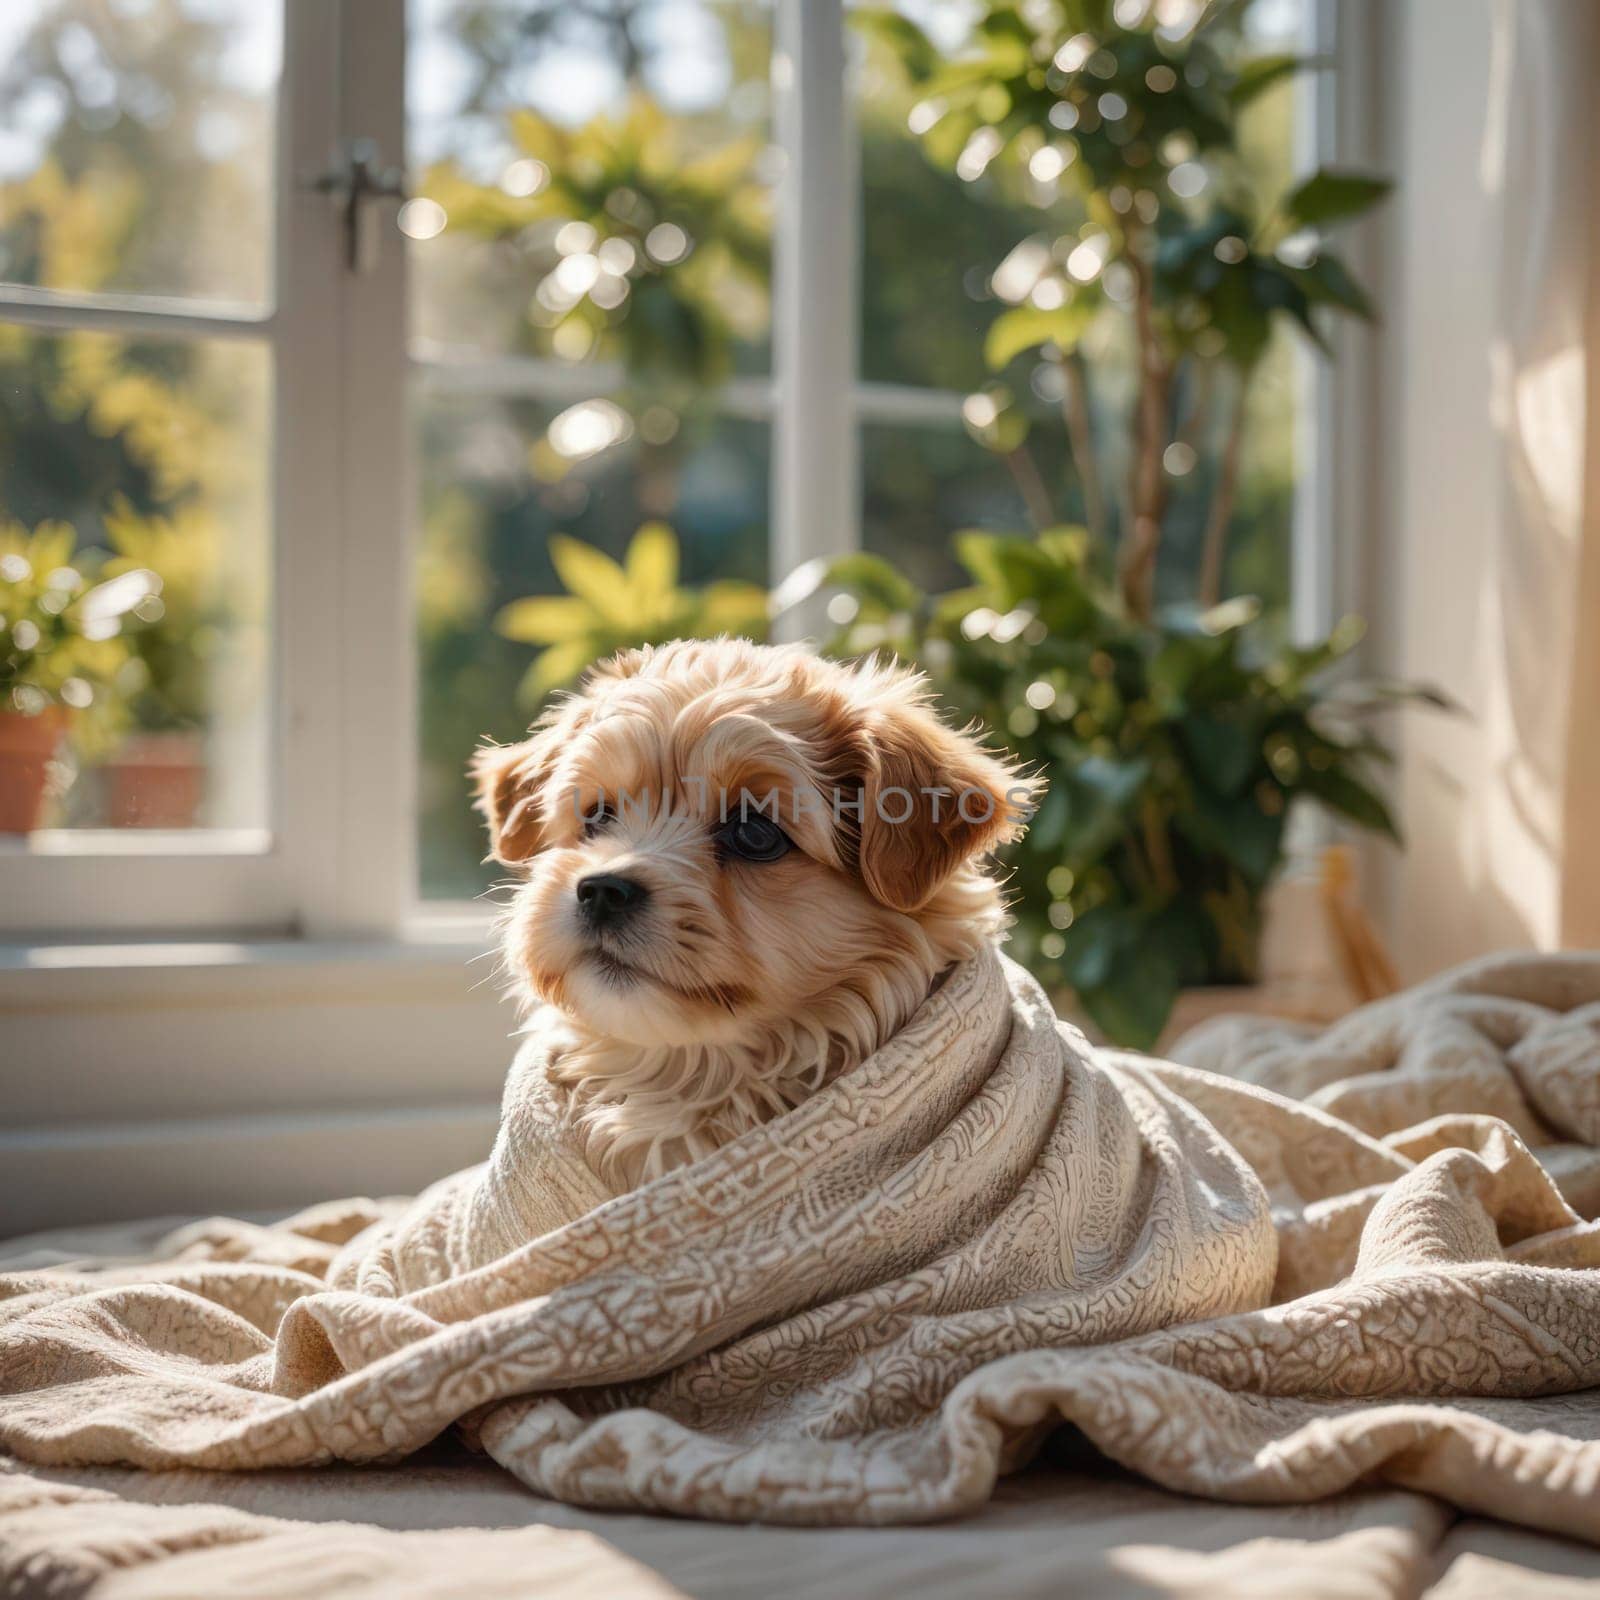 Cute lovely puppy on a blanket, backlight, portrait photo. Blurred background by VeroDibe